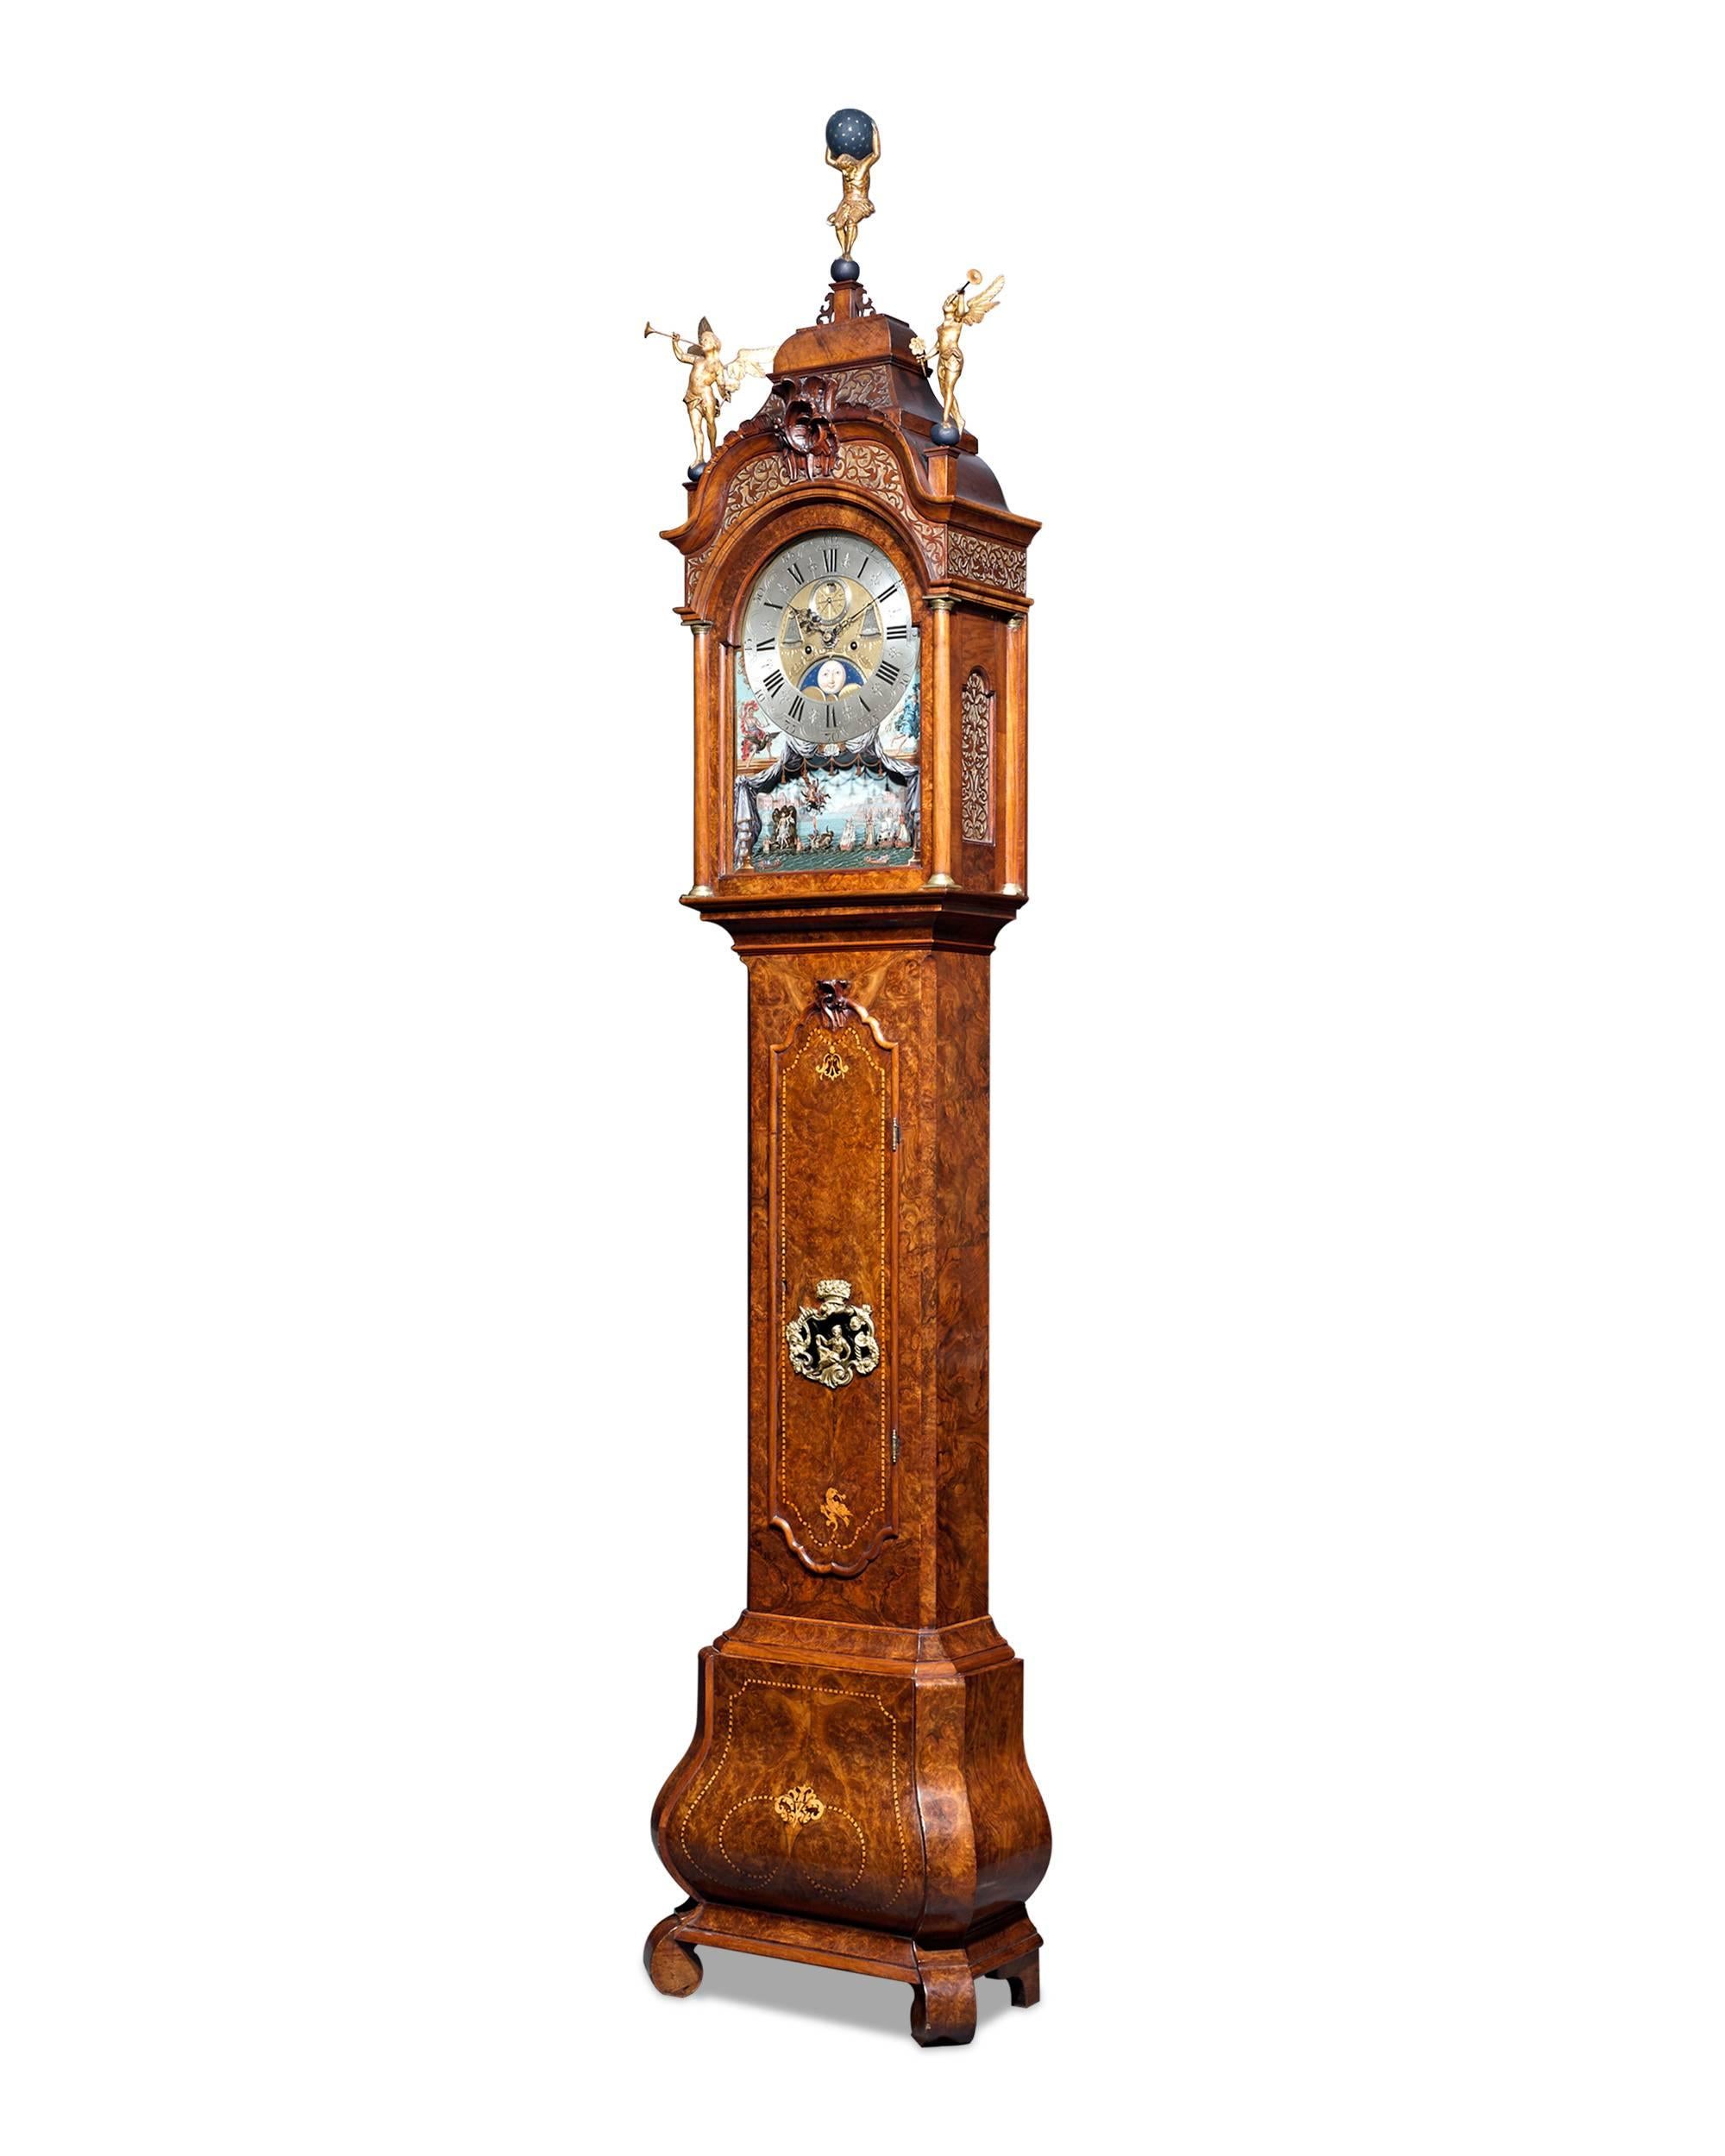 An exceptional example of 18th century Dutch clockmaking, this marvellous longcase clock was crafted by Jan Henkels of Amsterdam (c.1722-1778), one of the most respected of the great Dutch clockmakers. The late Baroque-style case is exemplary of